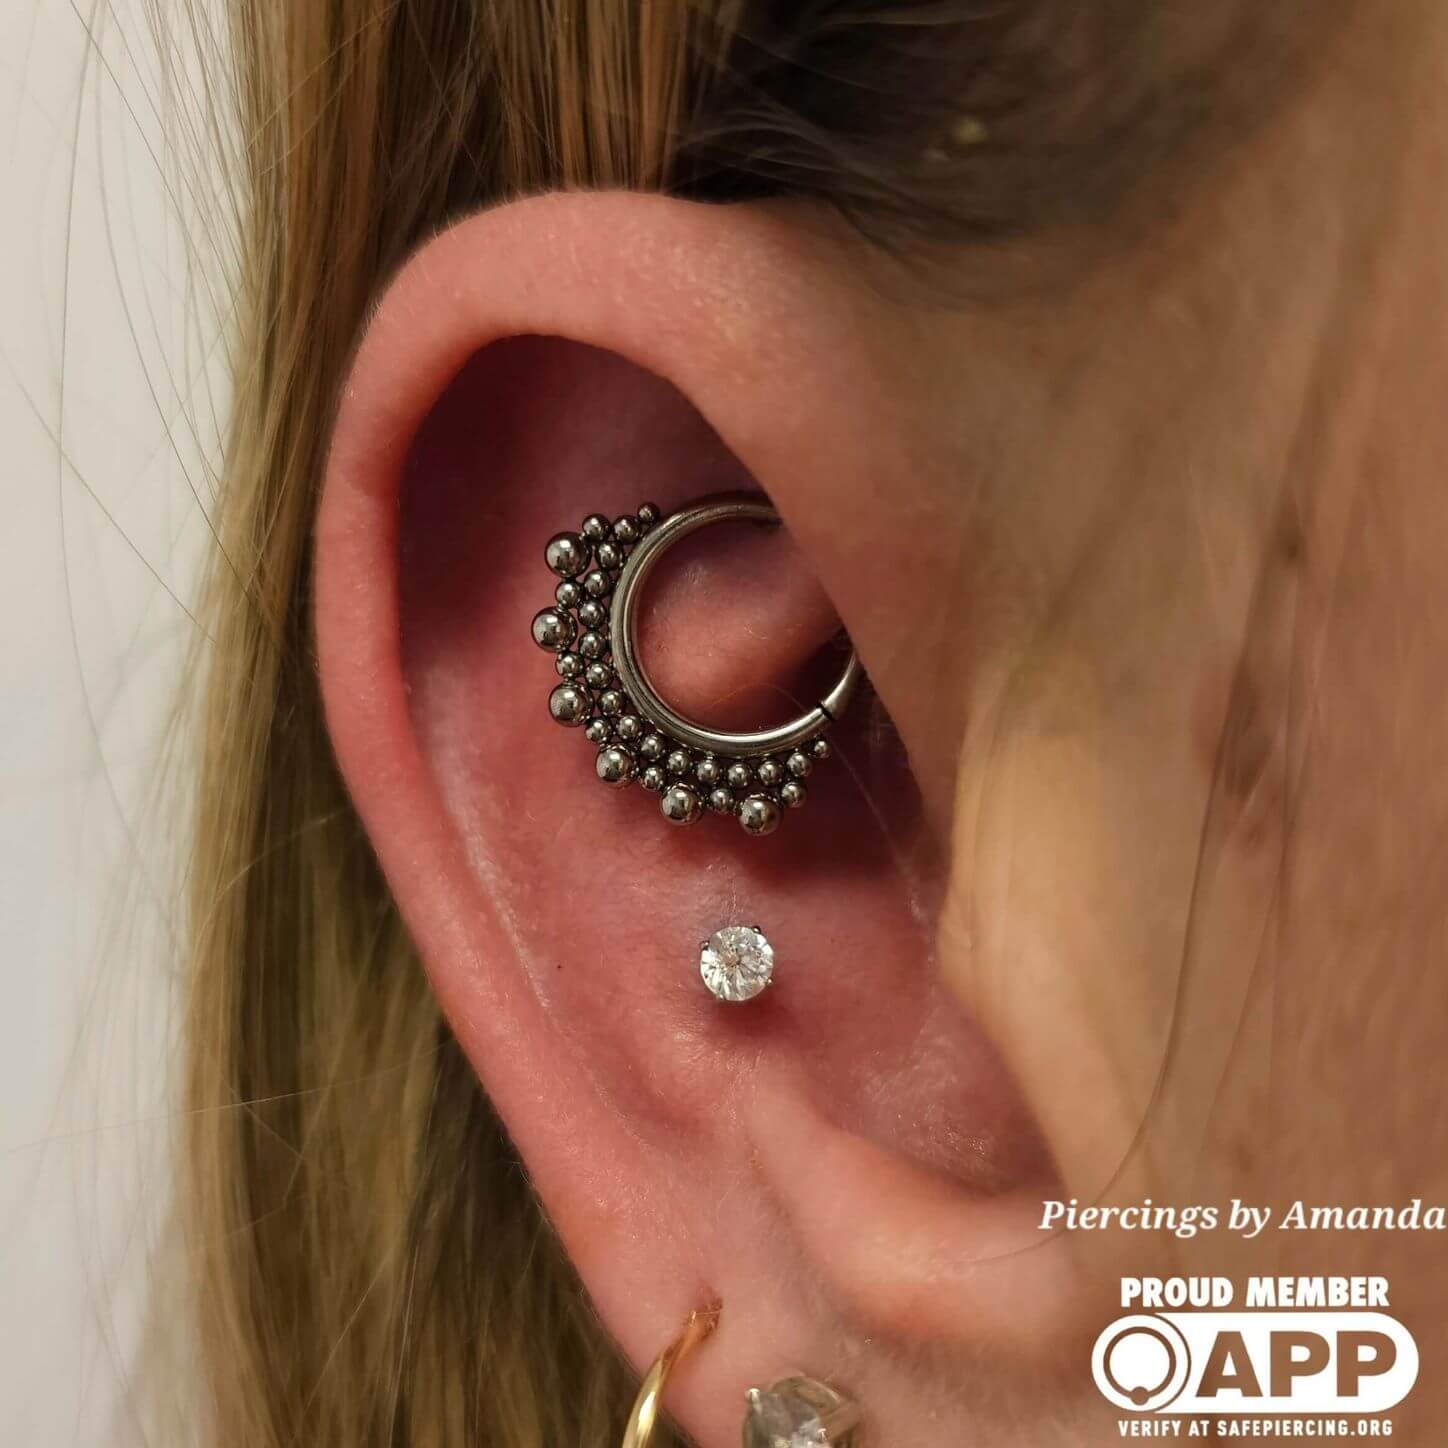 Rook and conch piercings with niobium and 18k white gold